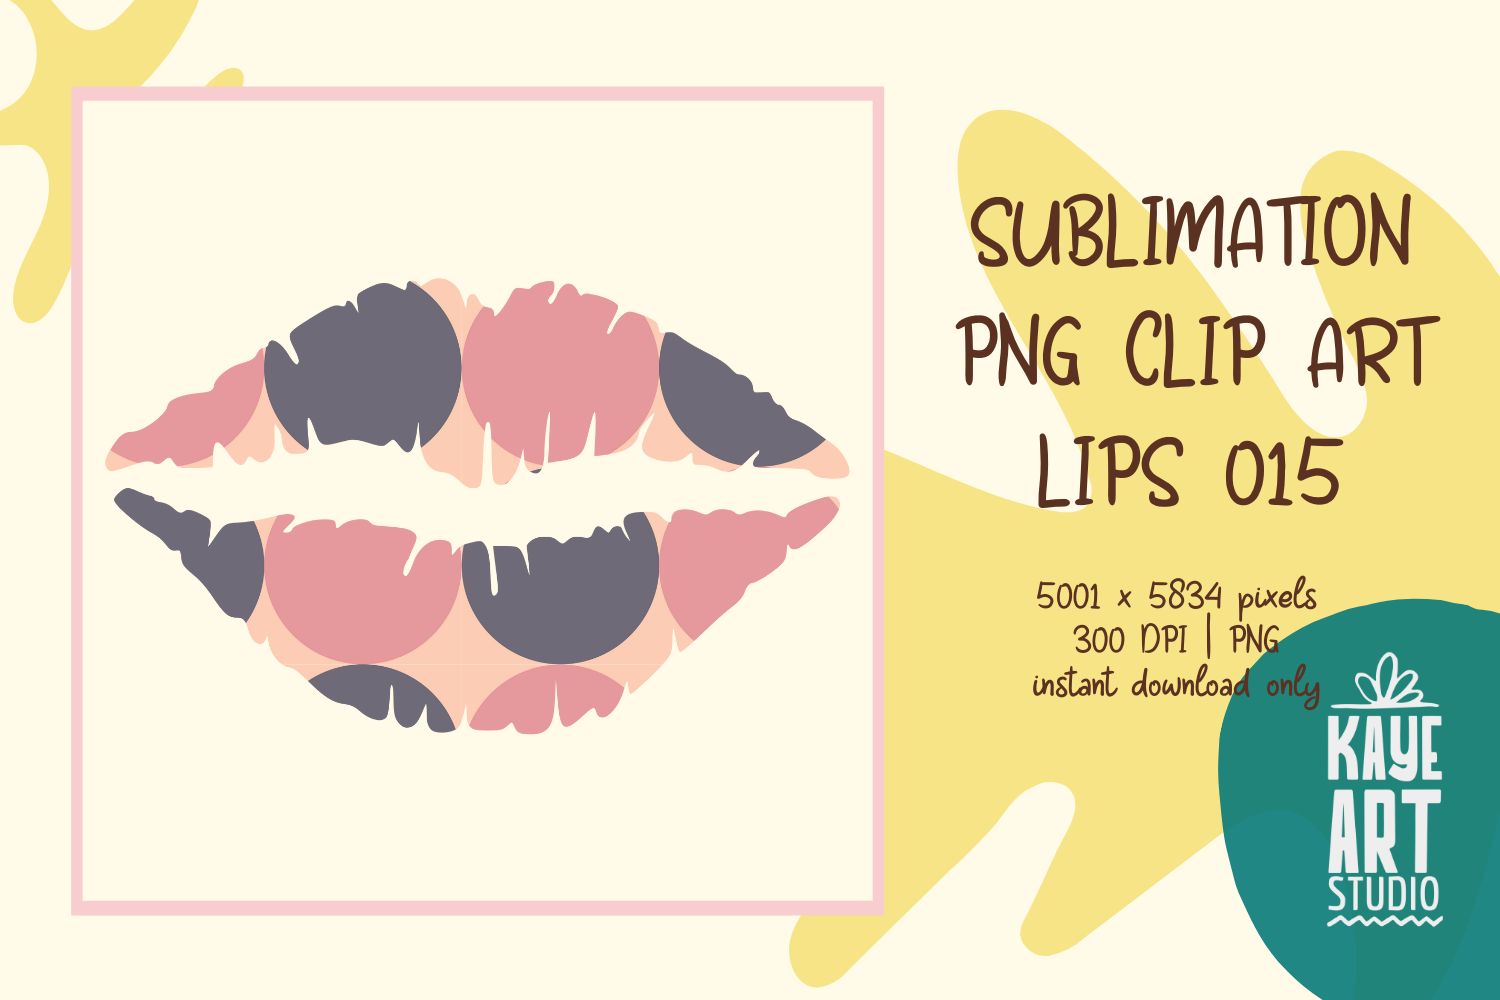 Lips Sublimation PNG Clip Art 015 Graphic by kayeartstudio · Creative ...